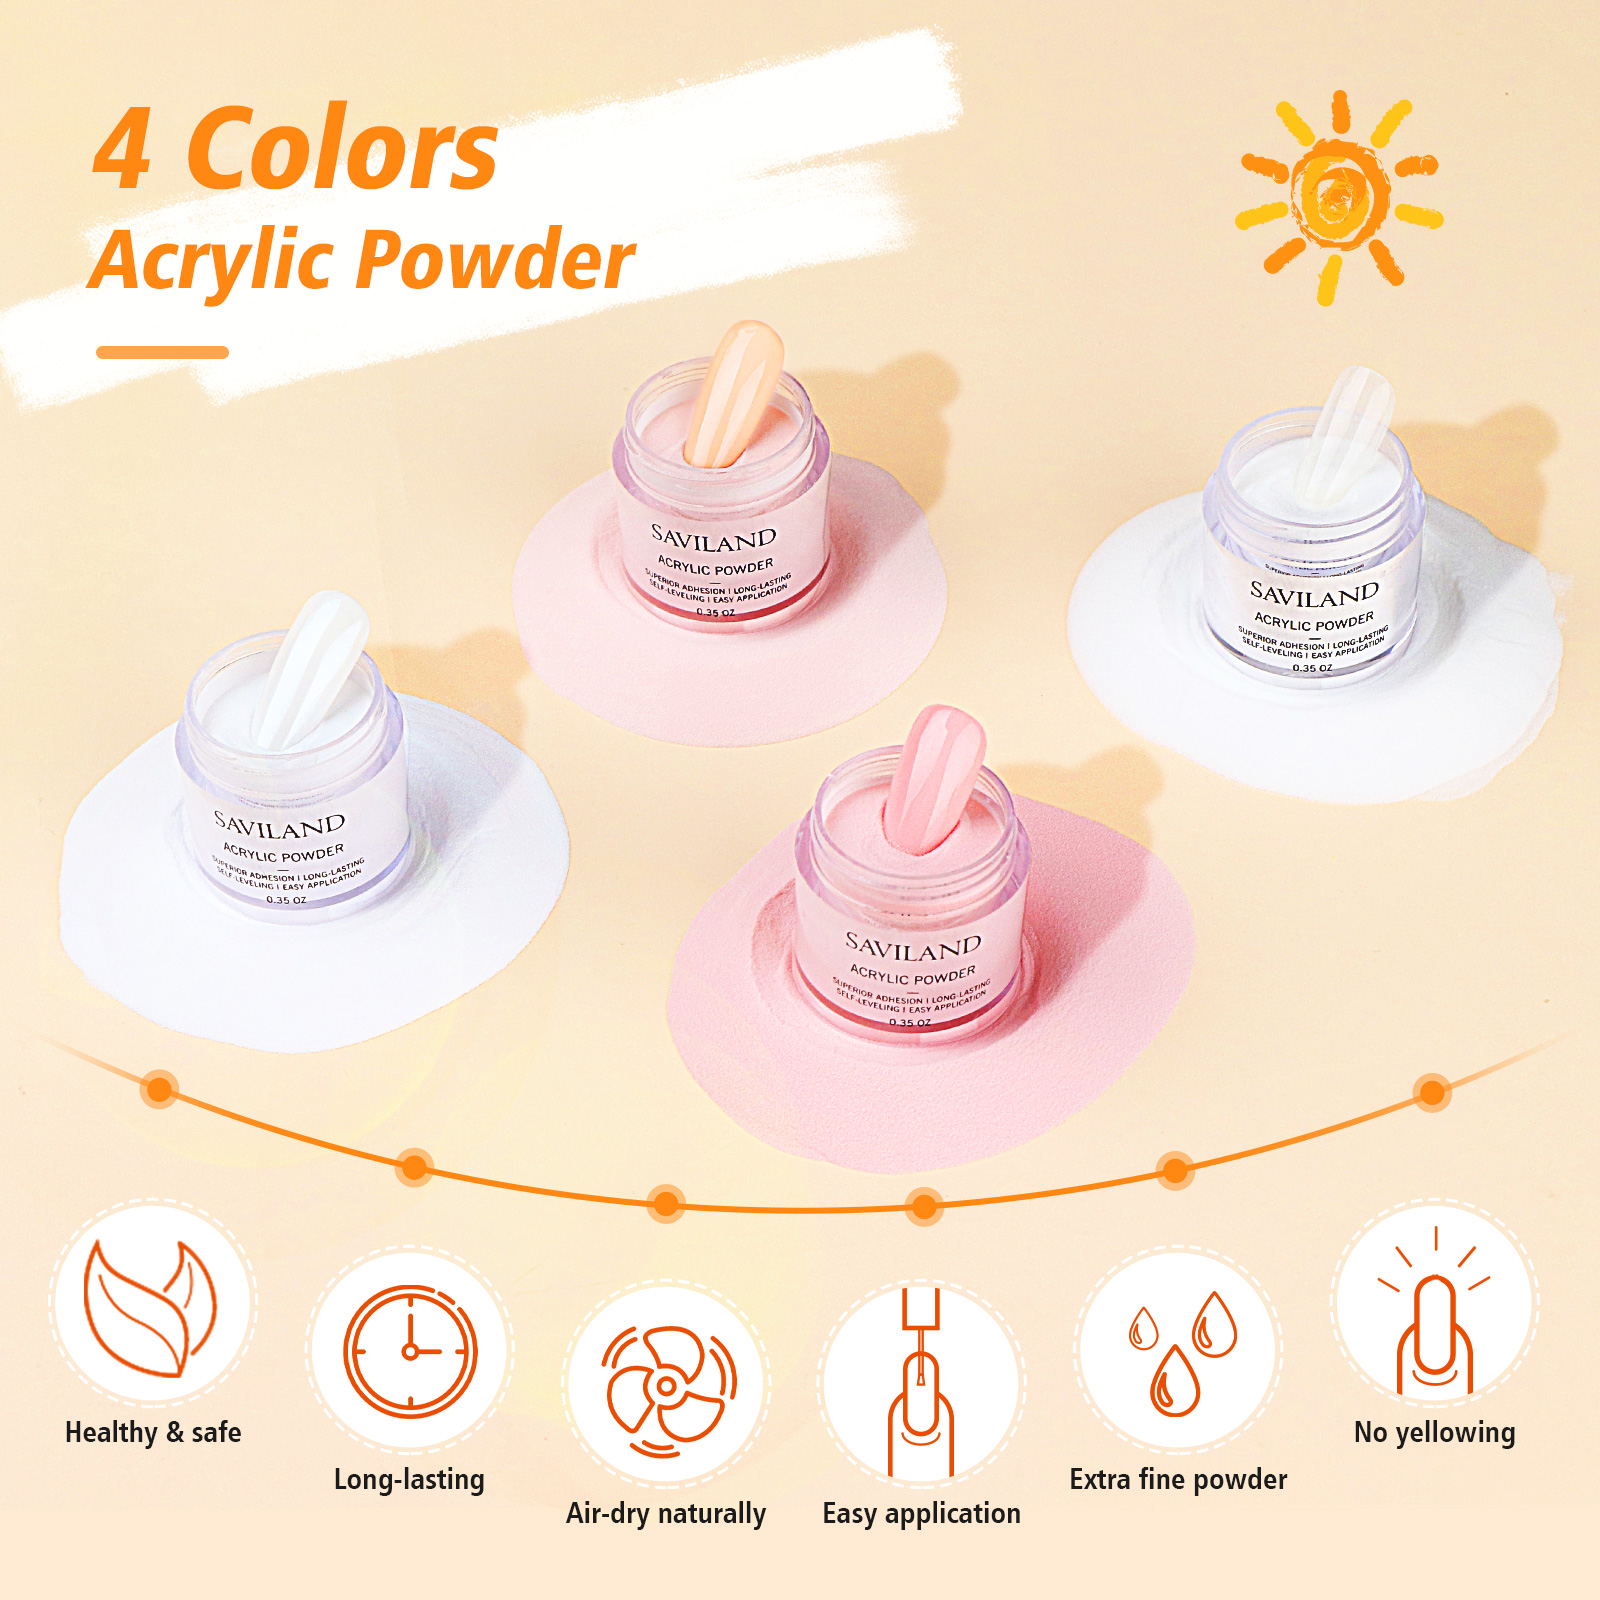 Saviland Acrylic Nail Kit- 4 Colors Clear/Pink/White/Nudes Acrylic Powder Set with Monomer Acrylic Liquid, Acrylic Nail Brush, Acid-Free Primer for Nail Extension with Everything - image 4 of 10